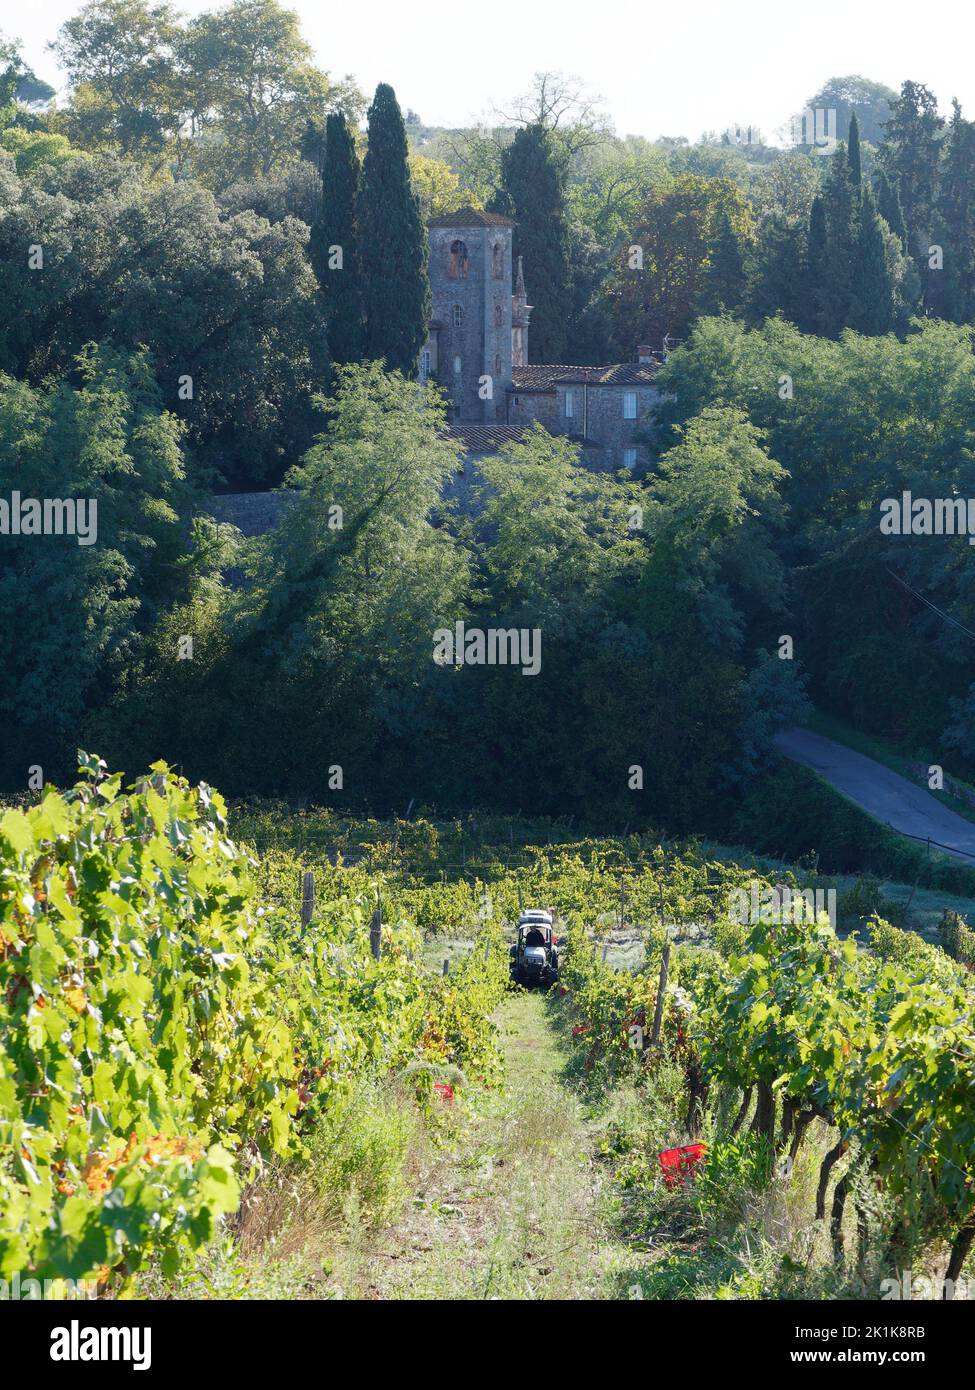 Grape harvest. Tractor in an organic vineyard in Camigliano near Lucca in Tuscany, Italy. Red boxes are ready to be filled with grapes. Stock Photo